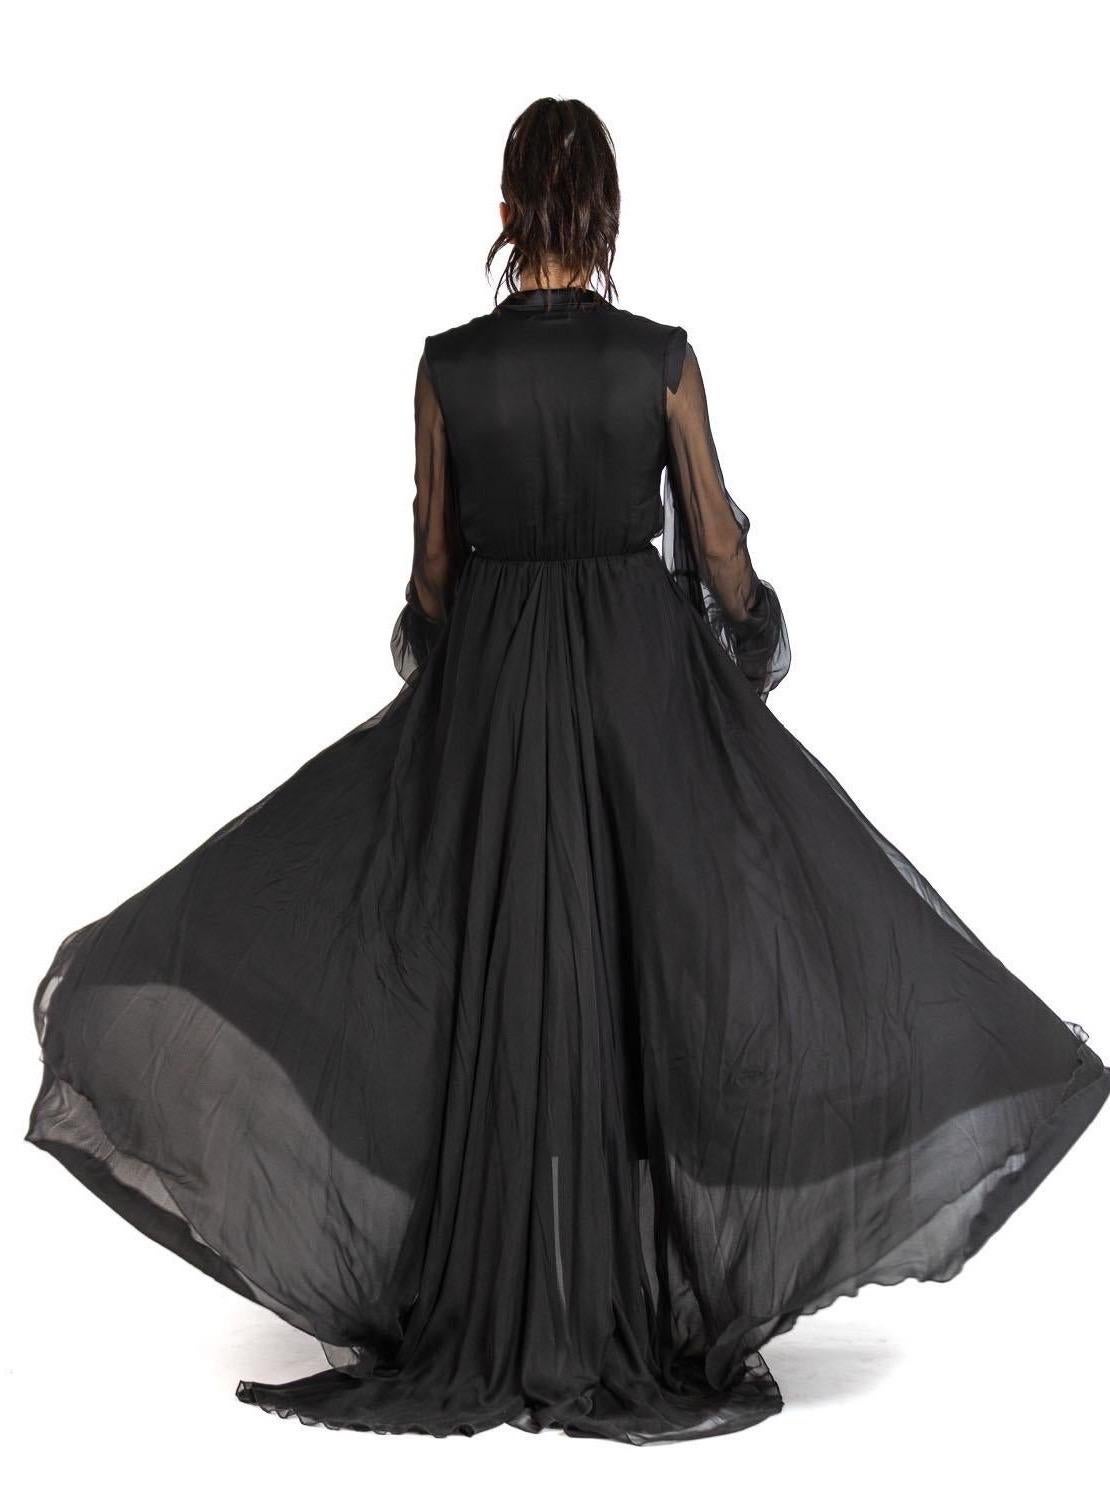 2000S SAINT LAURENT Black Silk Chiffon Tuxedo Lapel Trained Gown With Sleeves & For Sale 4